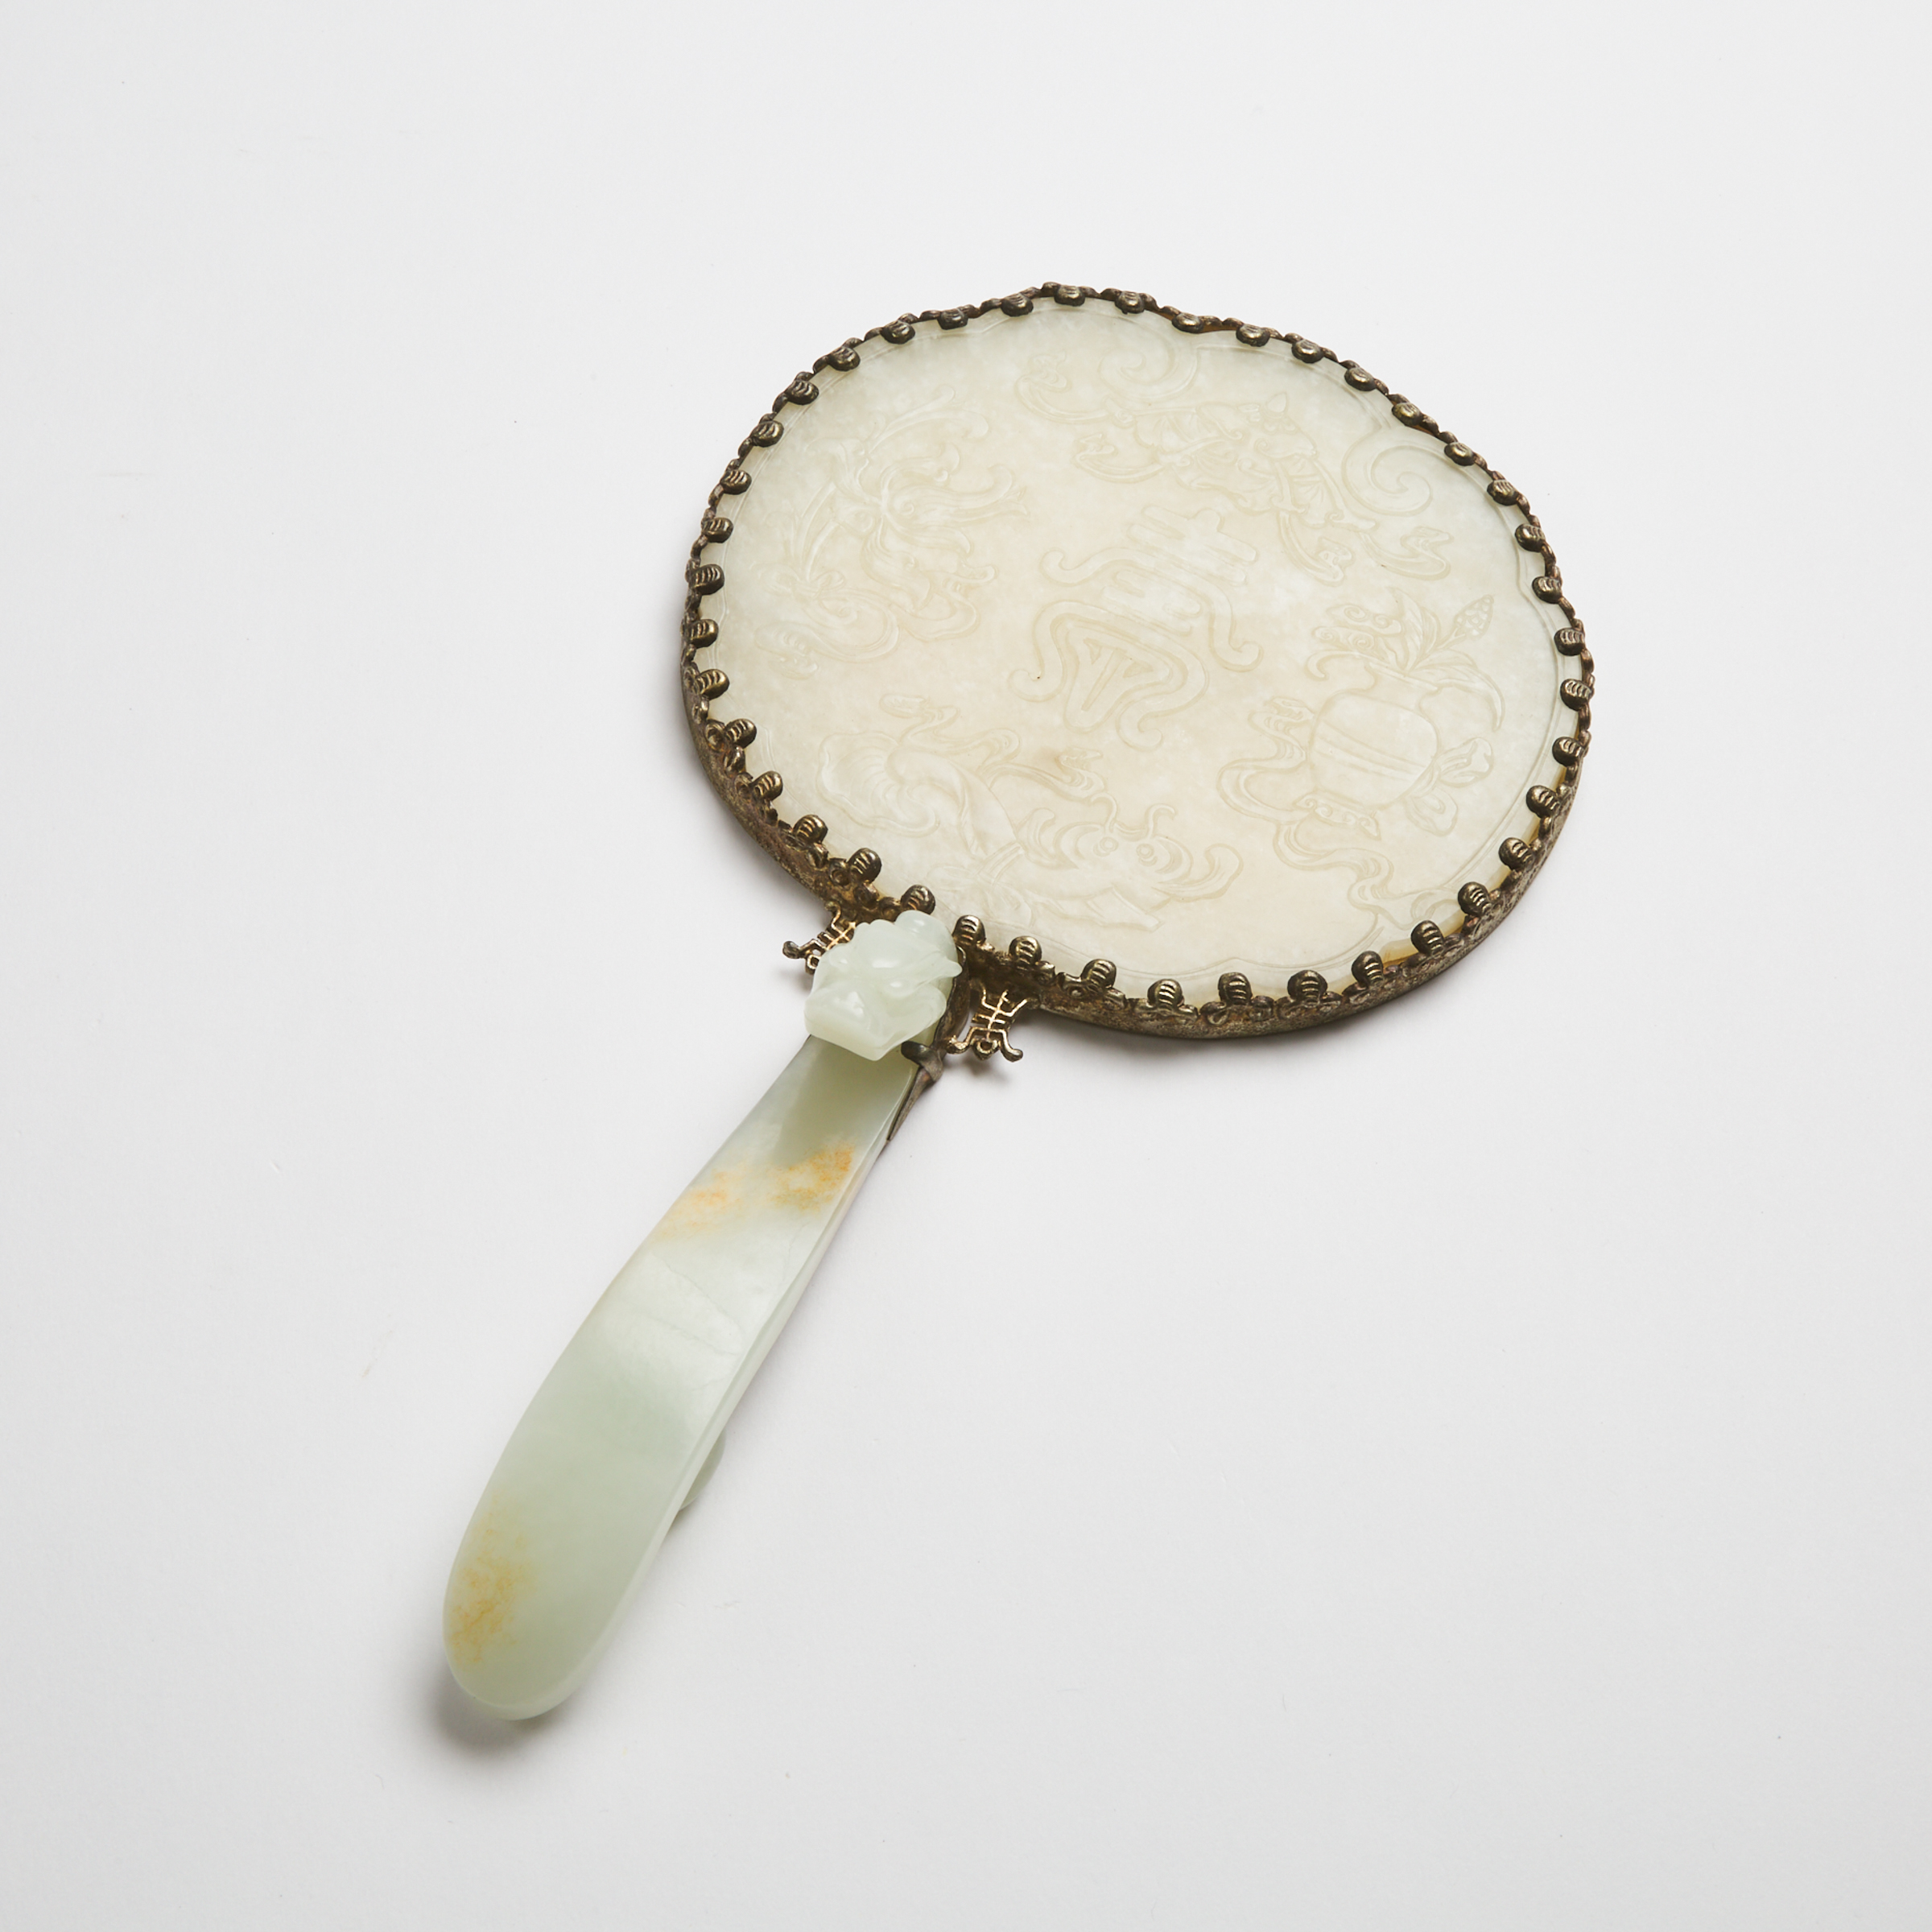 A White Jade Mounted Silver Hand